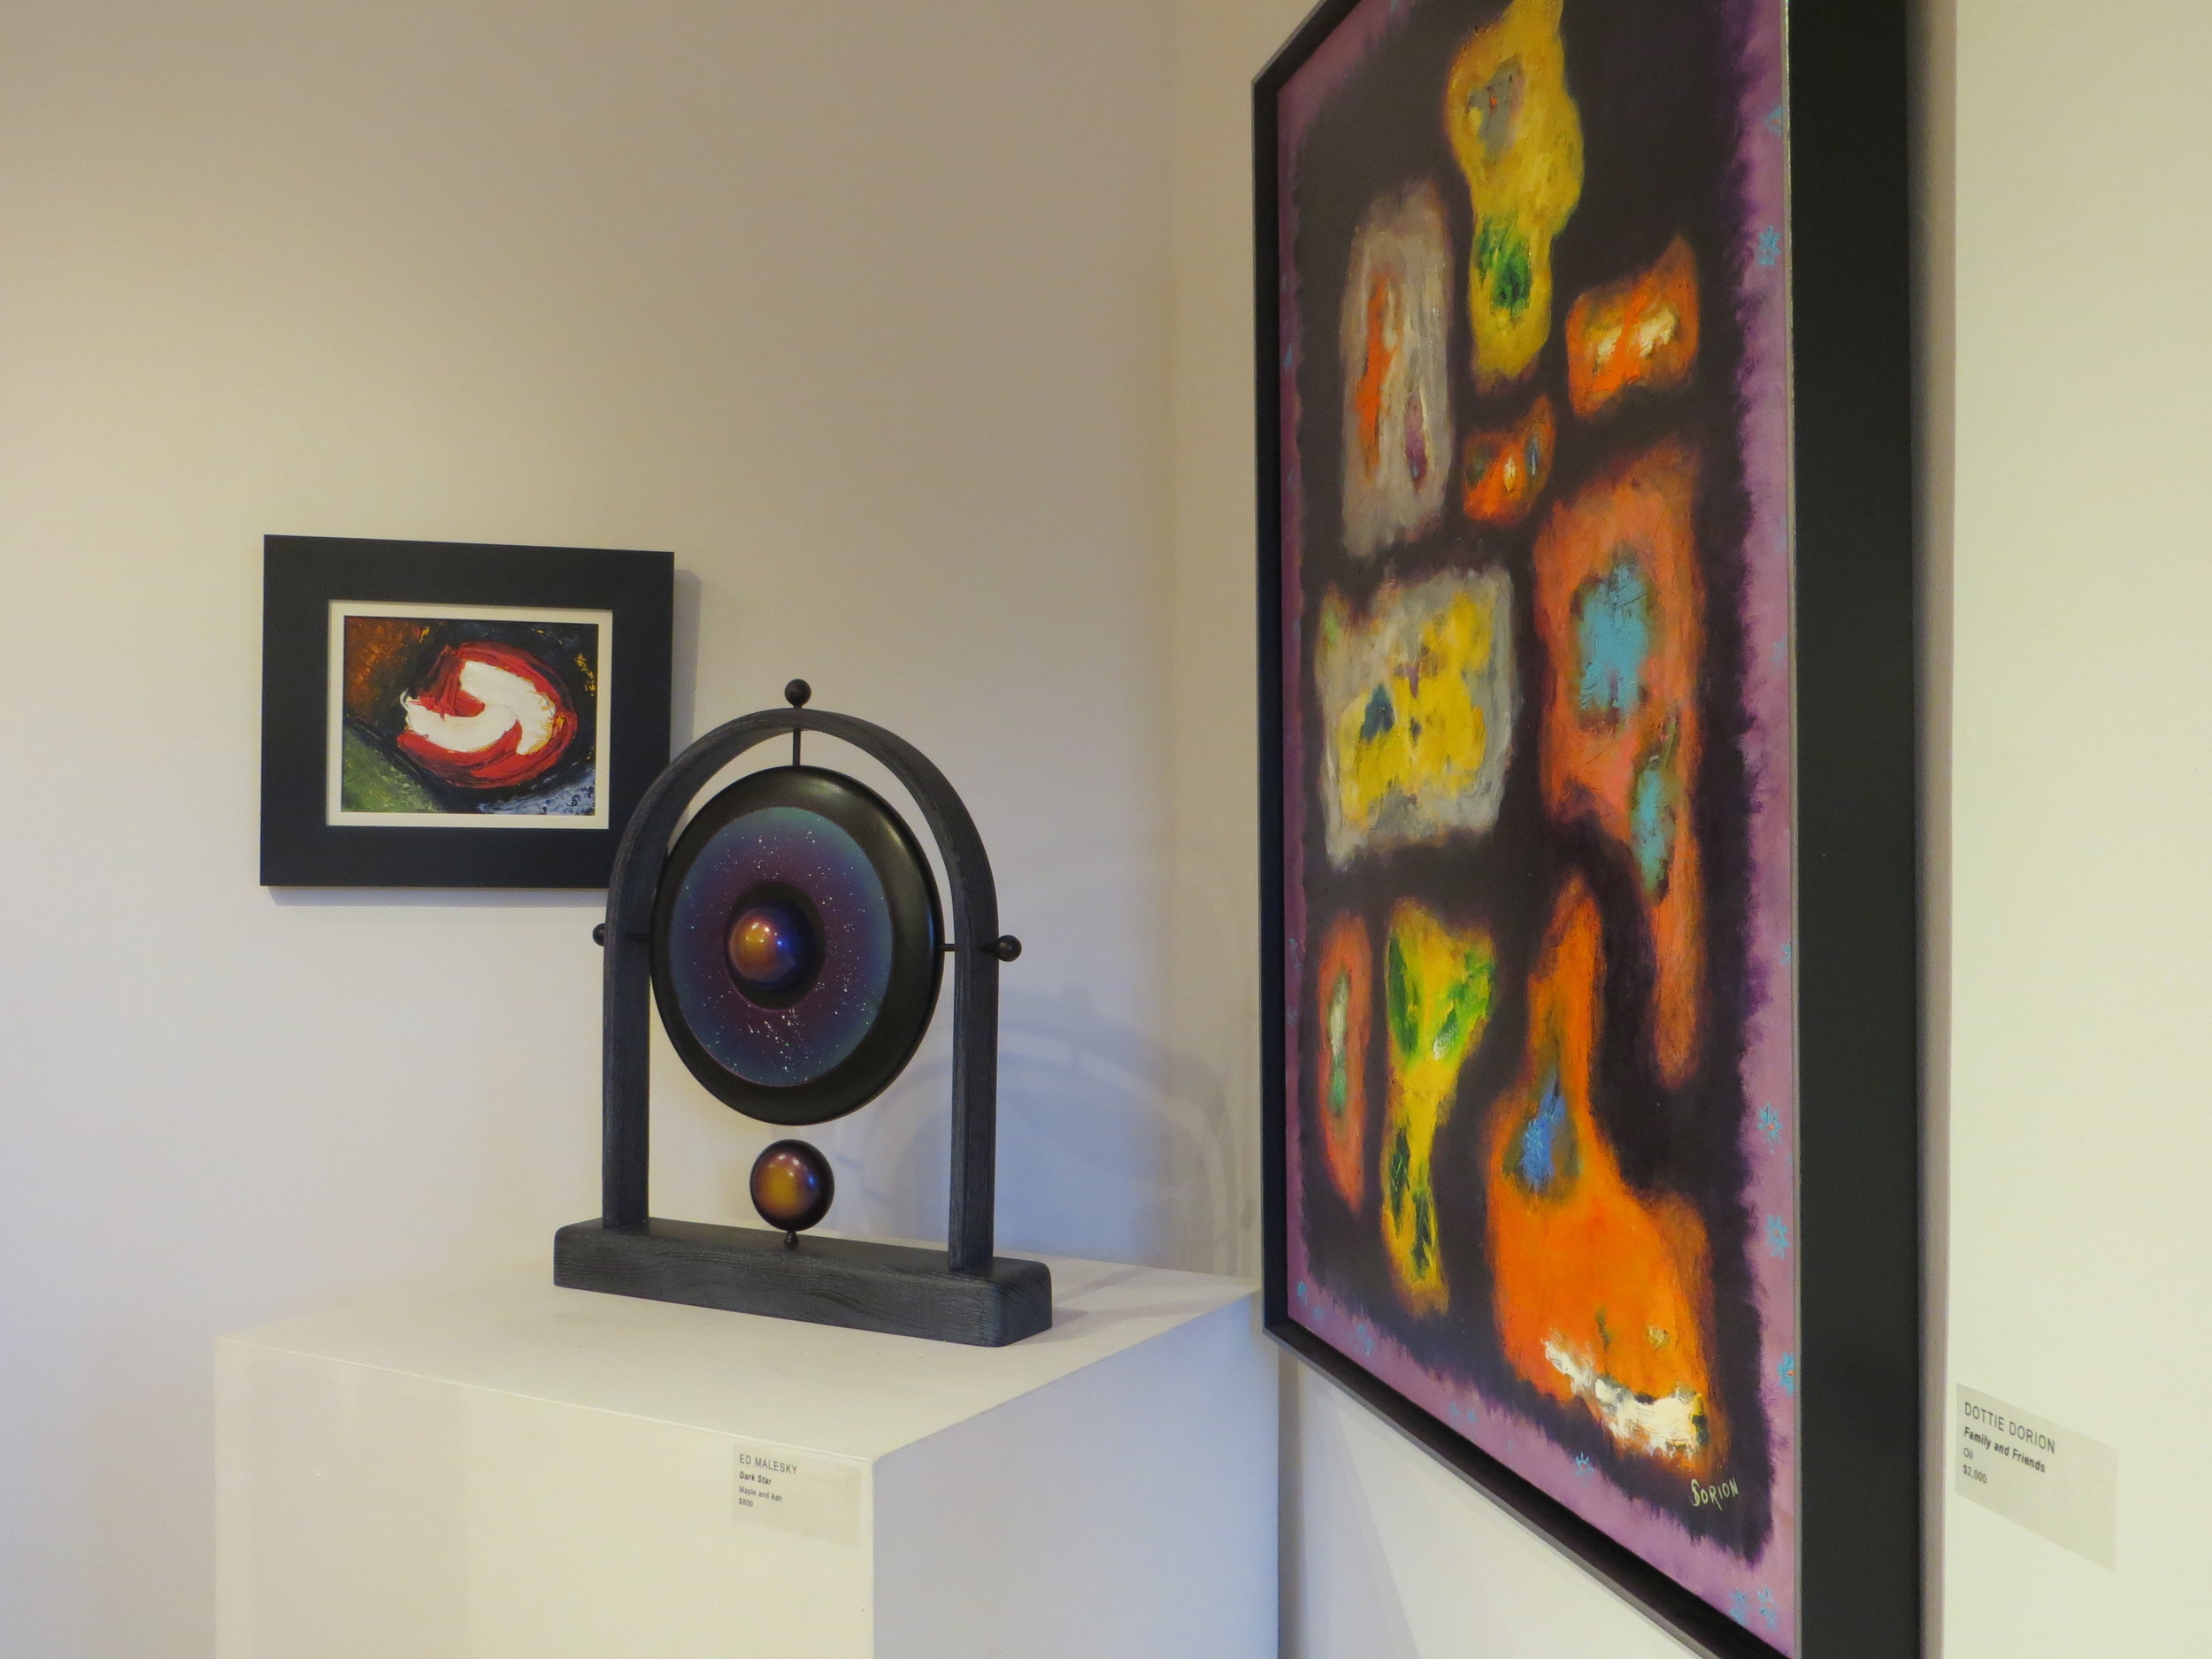 The Cultural Center at Ponte Vedra Beach’s newest exhibition “Splashes of a Colorful Life,” abstract paintings by Dottie Dorion and “Shadows,” turned wood works by Ed Malesky will be on display through Nov. 11.